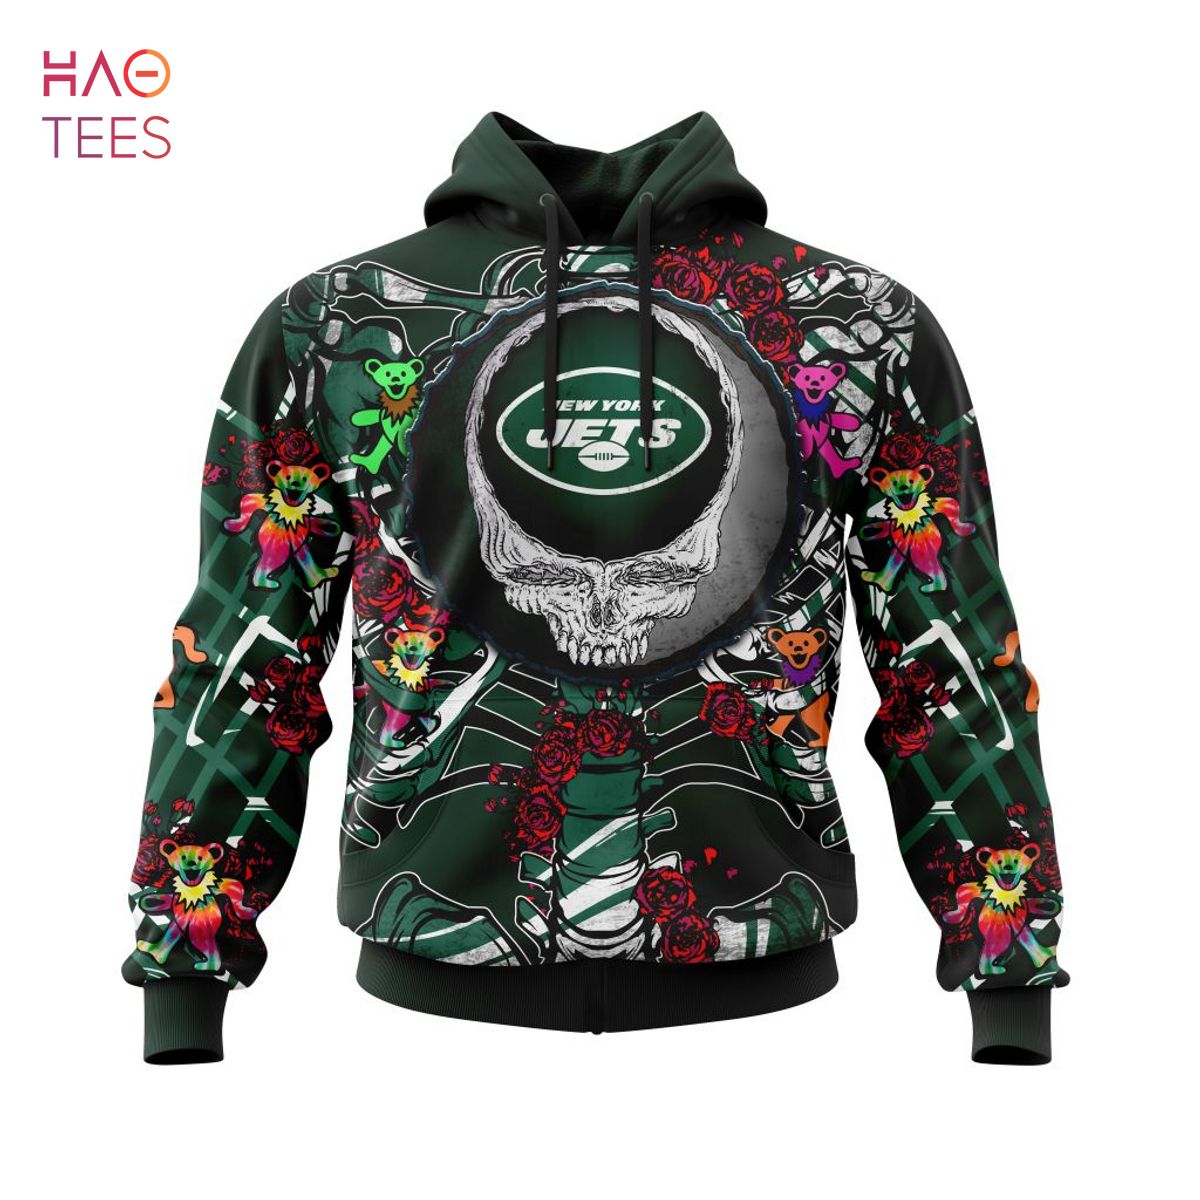 BEST NFL New York Jets Mix Grateful Dead, Personalized Name & Number Specialized Concepts Kits 3D Hoodie